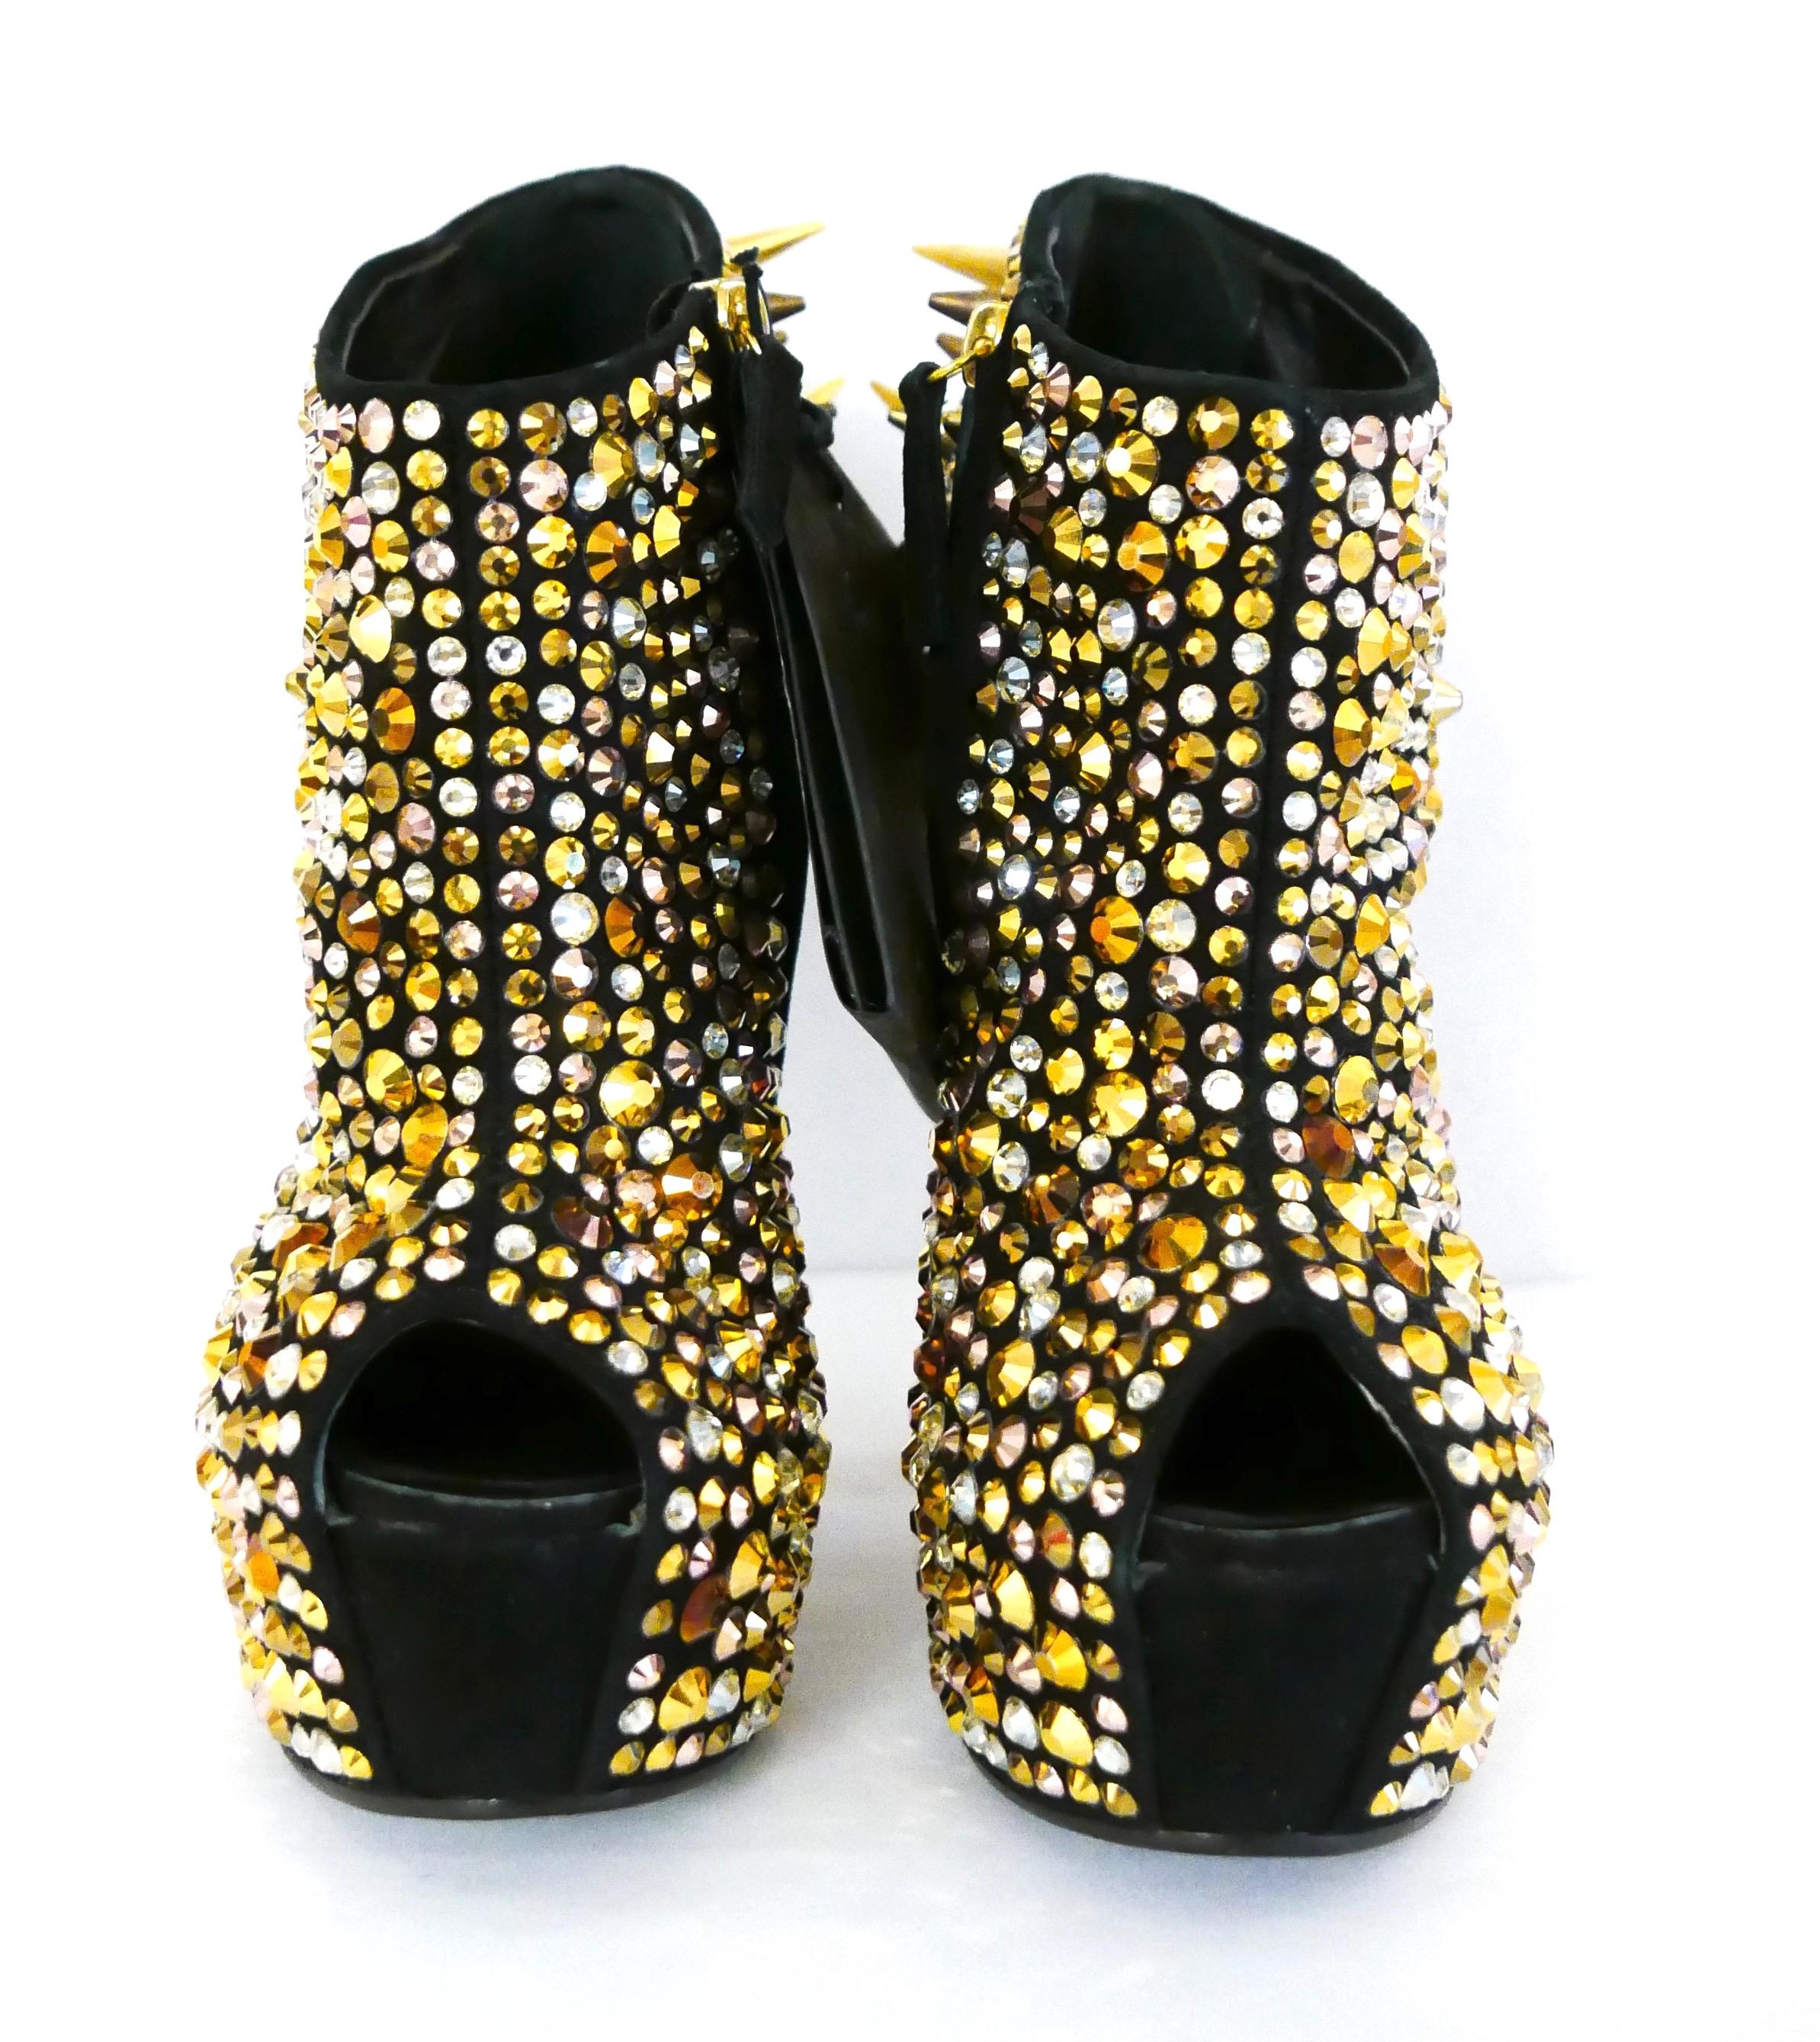 Work of art Giuseppe Zanotti maxi wedge bootie with crystal and spike detail. Bought for $2950 and unworn with spare spikes/tag. 
Meticulously crafted in black suede with heavy crystal, stud and spike embellishments. They have a towering yet sturdy